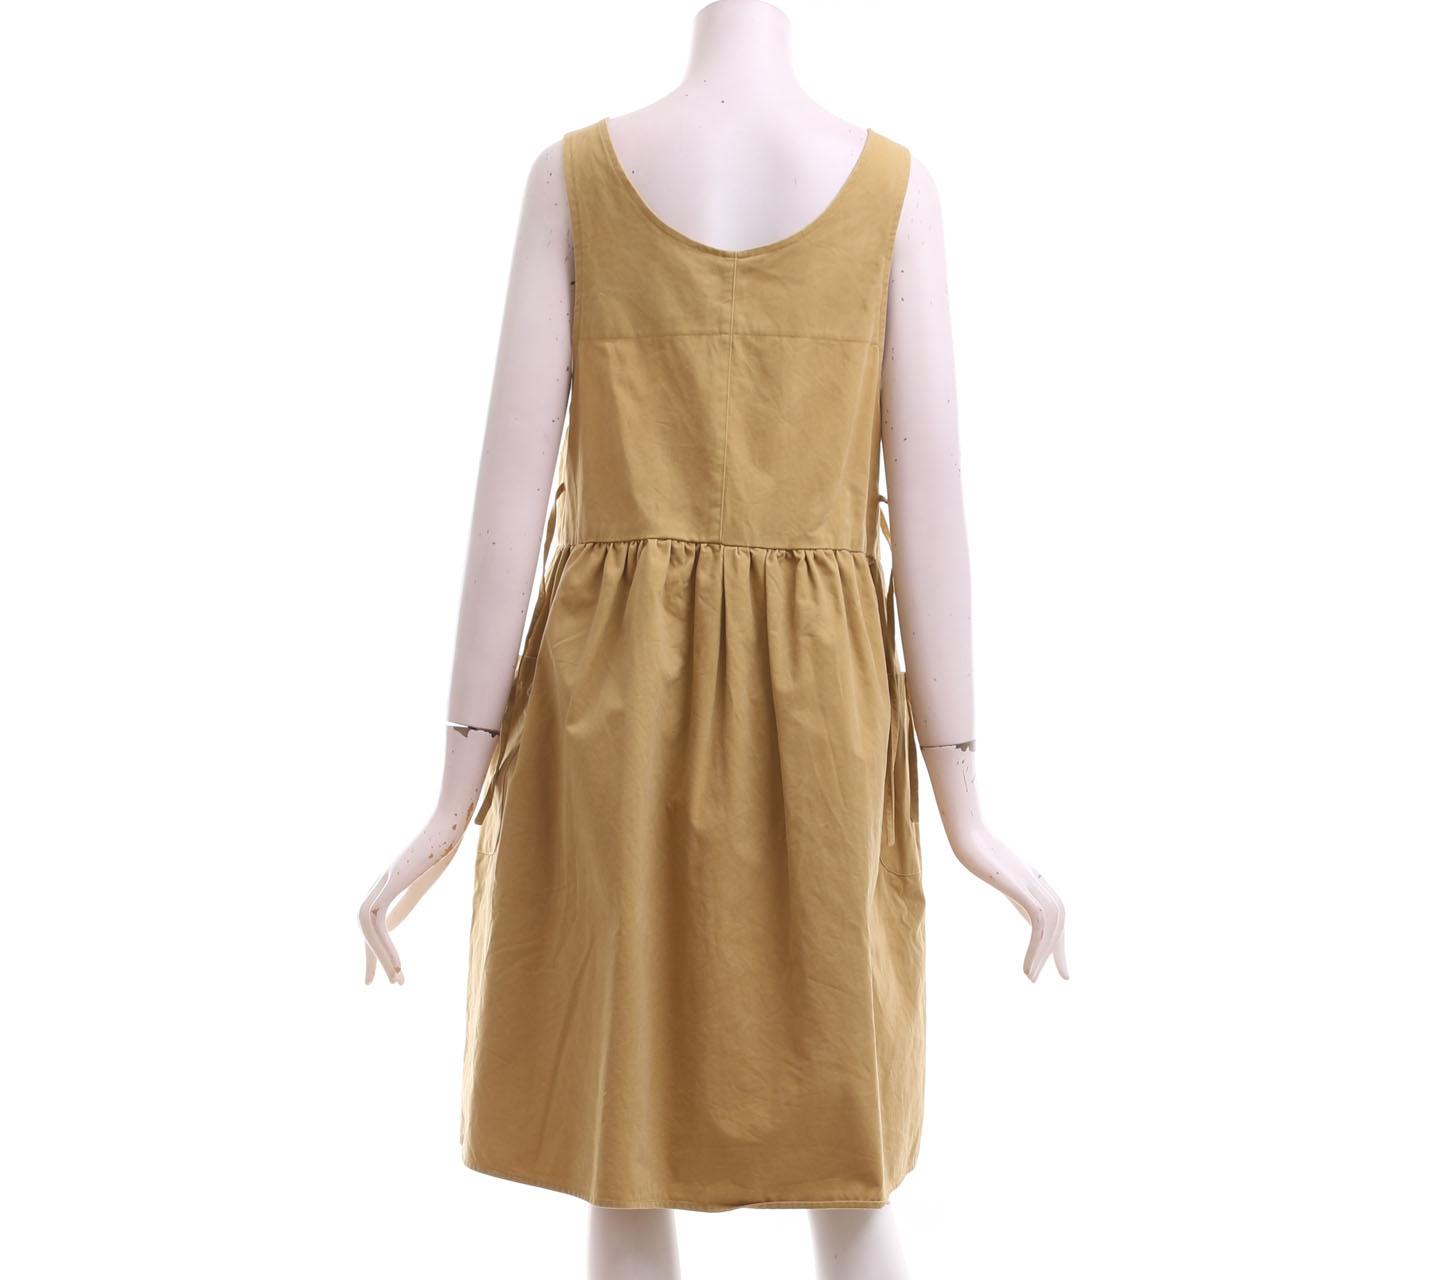 By Olive Olive Overall Mini Dress